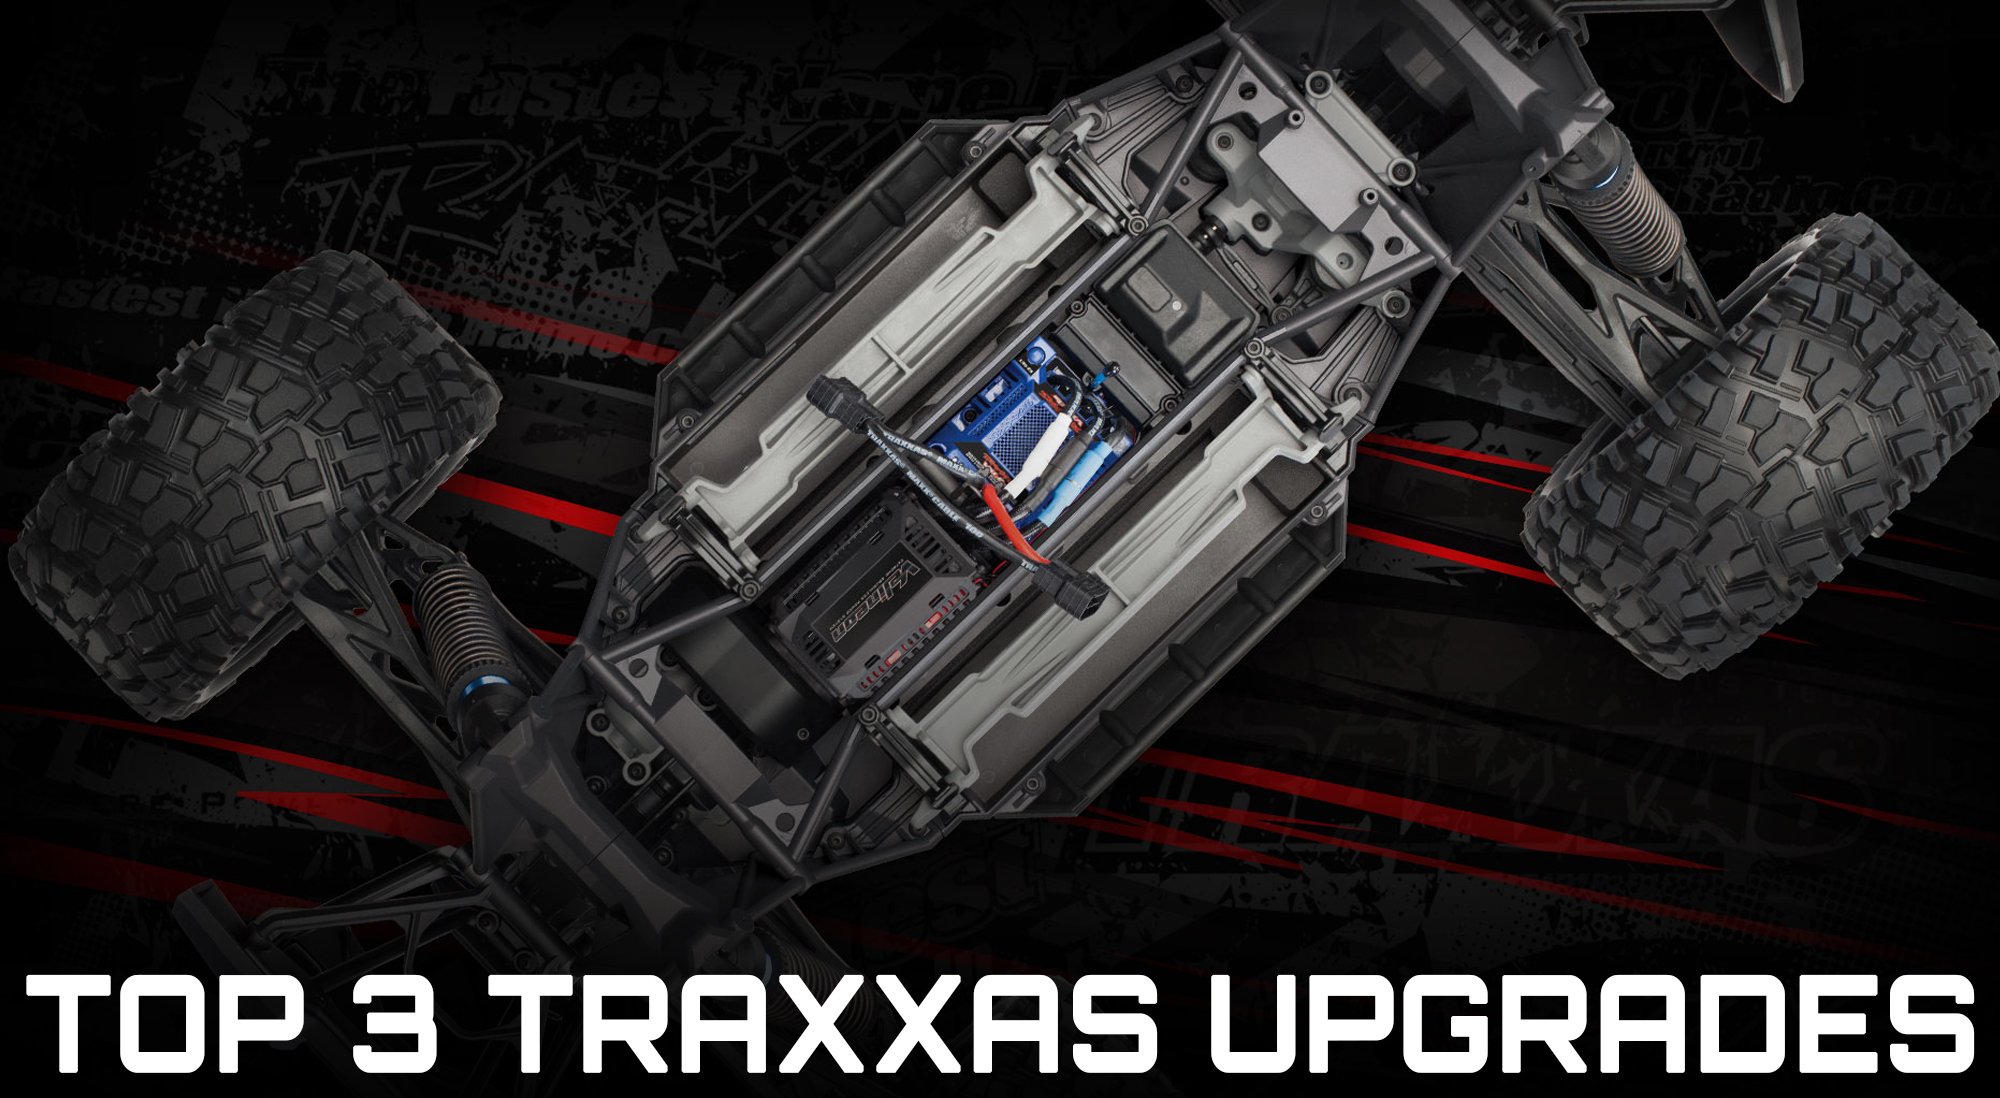 Traxxas Upgrades - What are our top three?